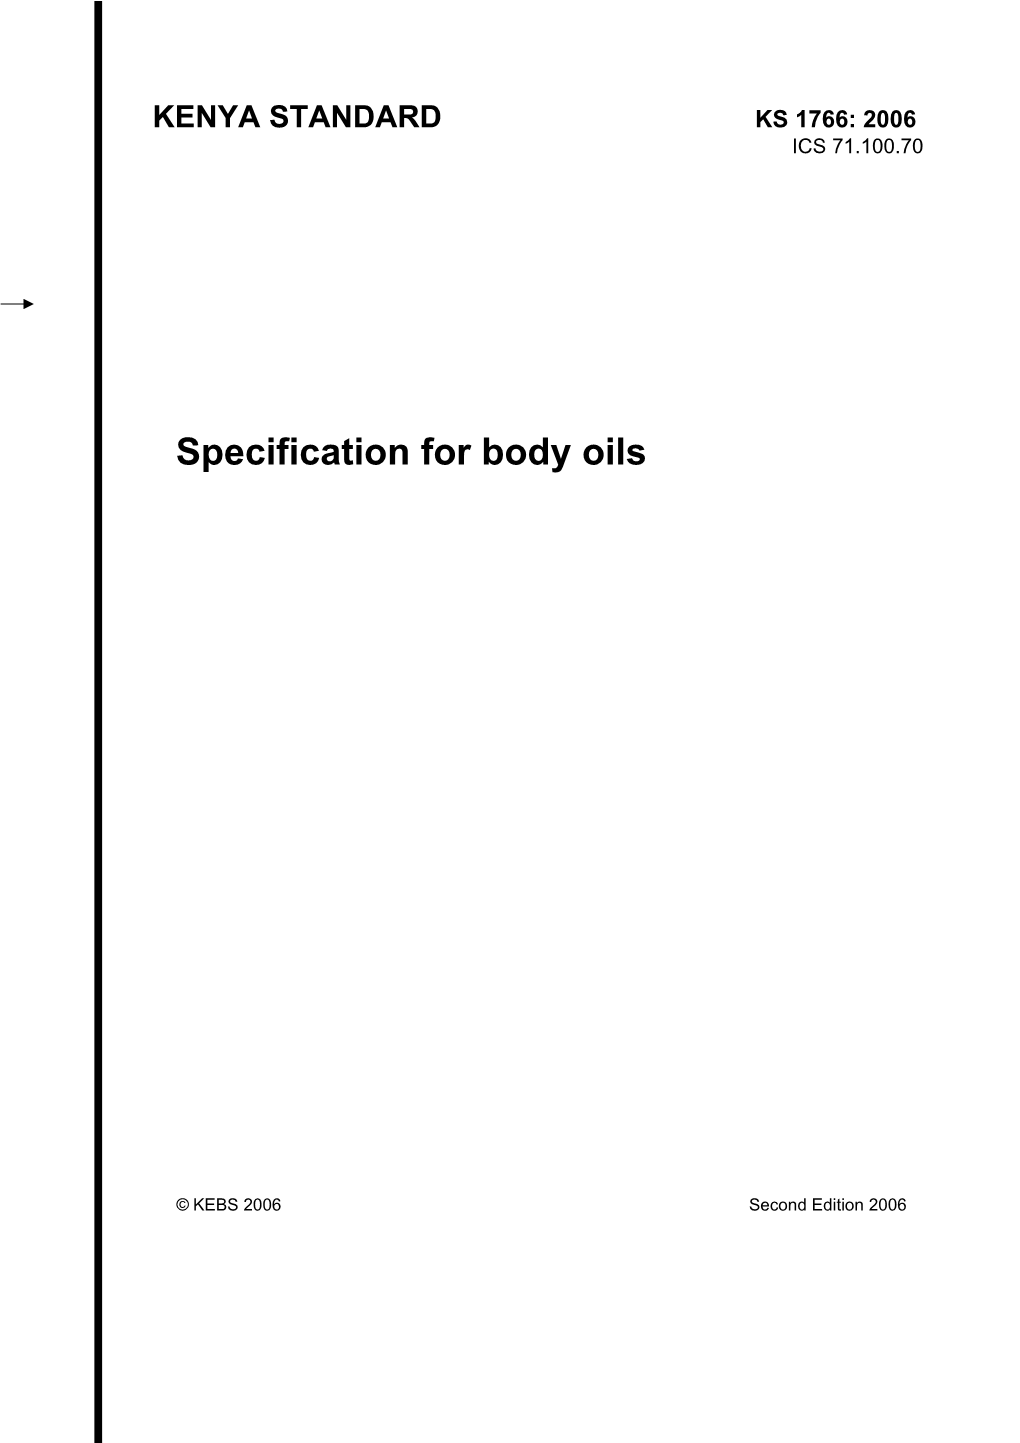 Specification for Body Oils